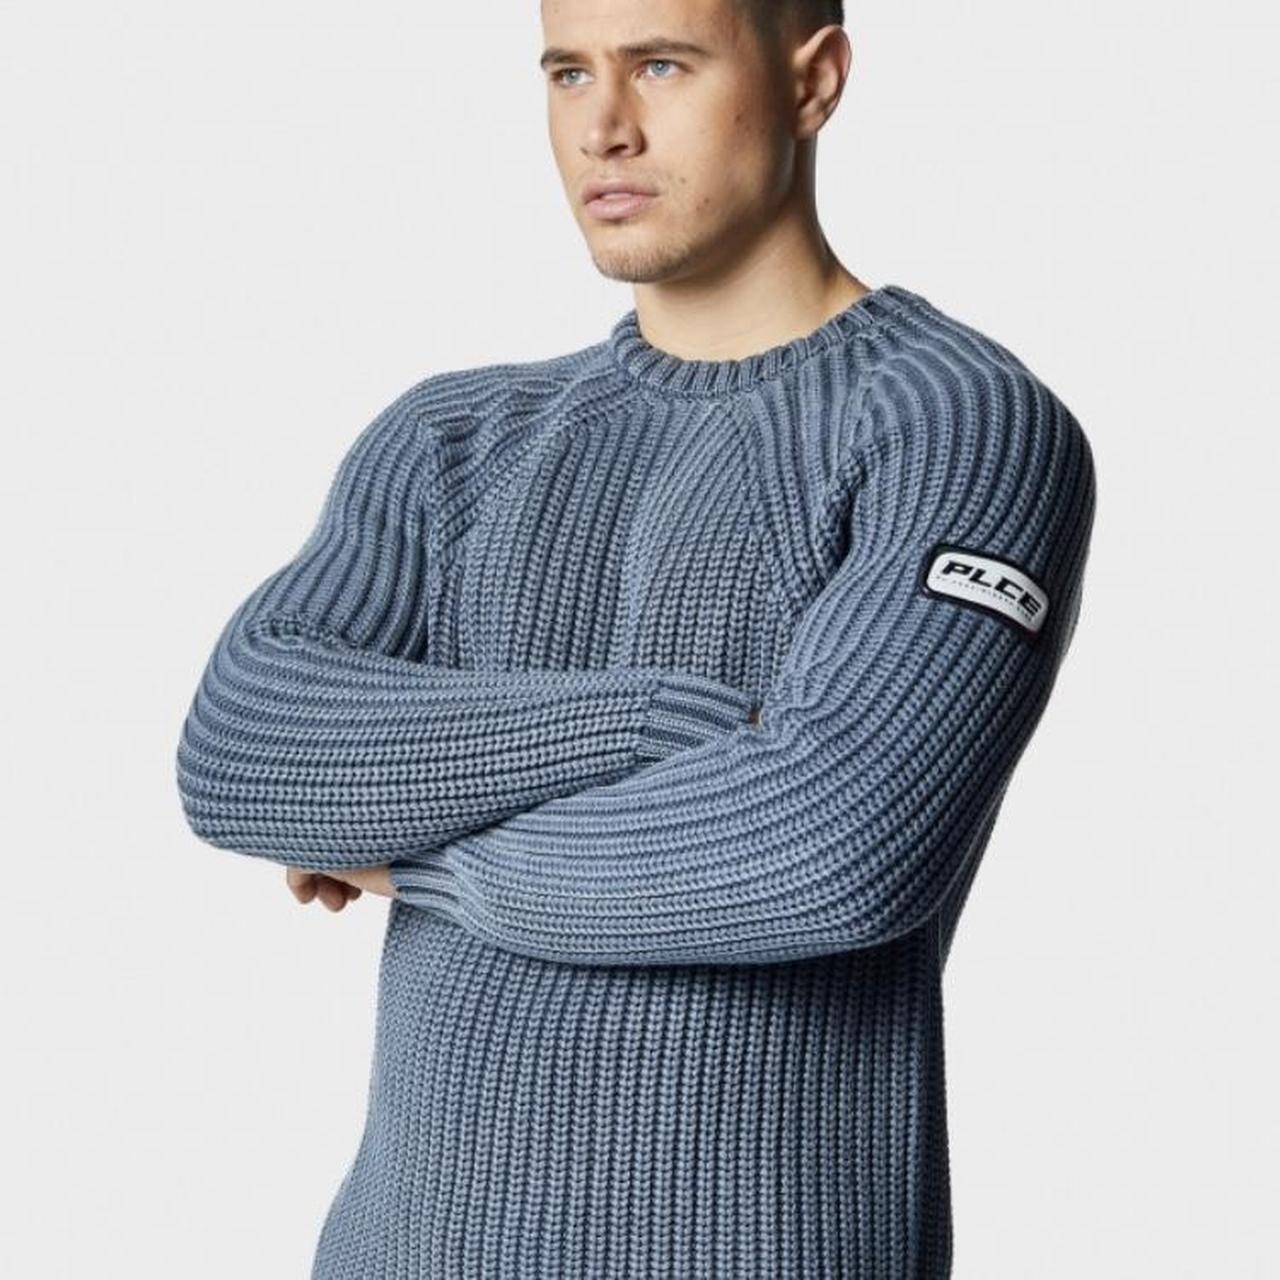 Product Image 2 - 883 POLICE

Winford Blue Knitwear

PLCE Winfold